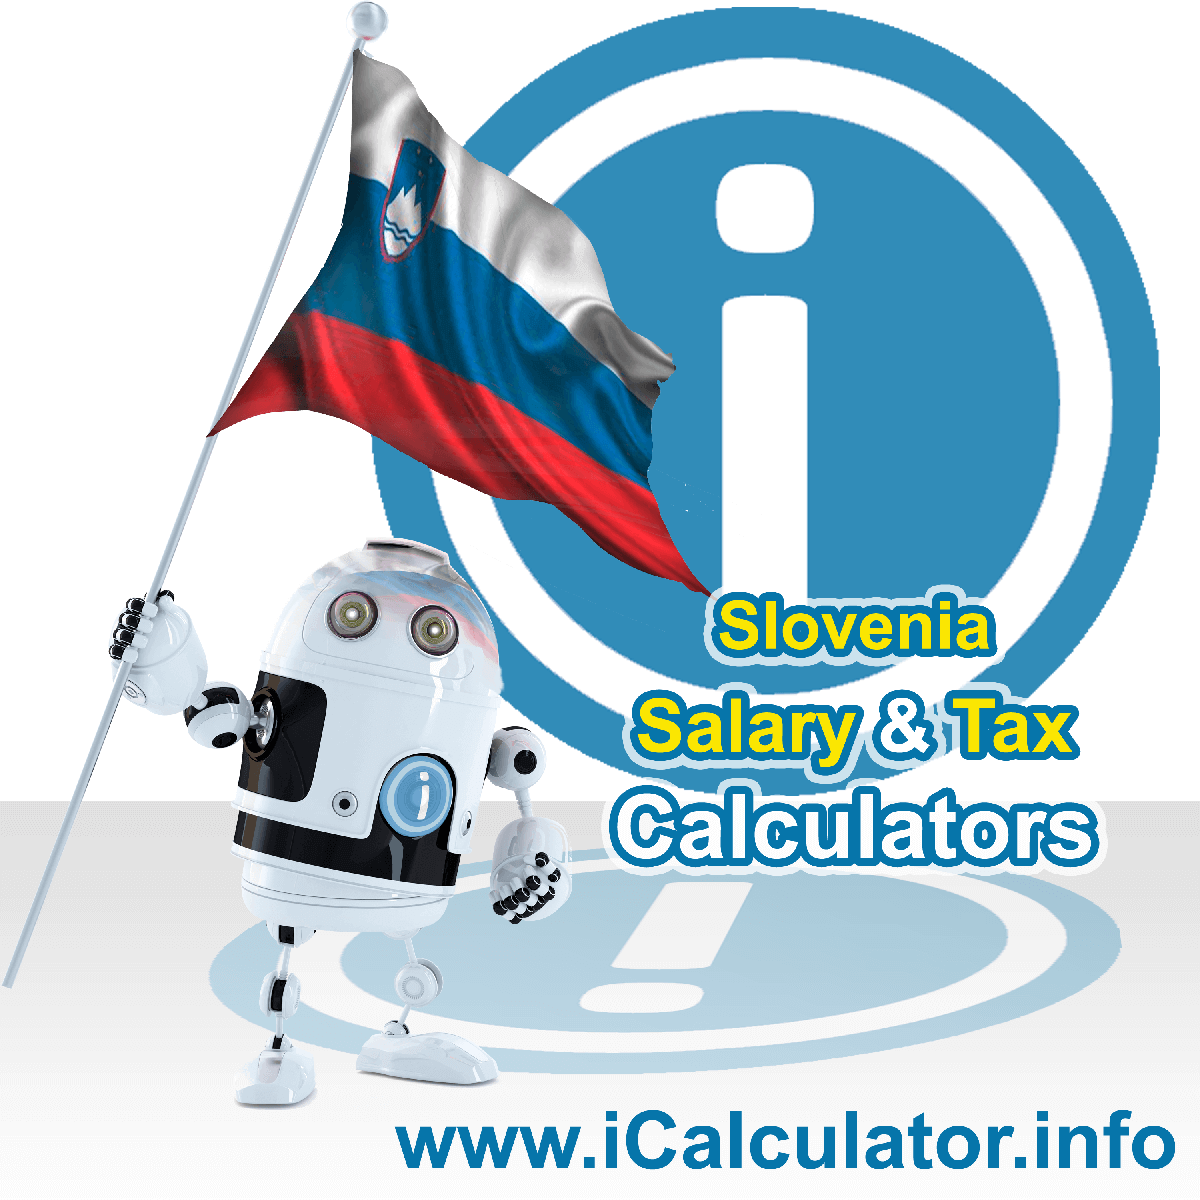 Slovenia Salary Calculator. This image shows the Sloveniaese flag and information relating to the tax formula for the Slovenia Tax Calculator